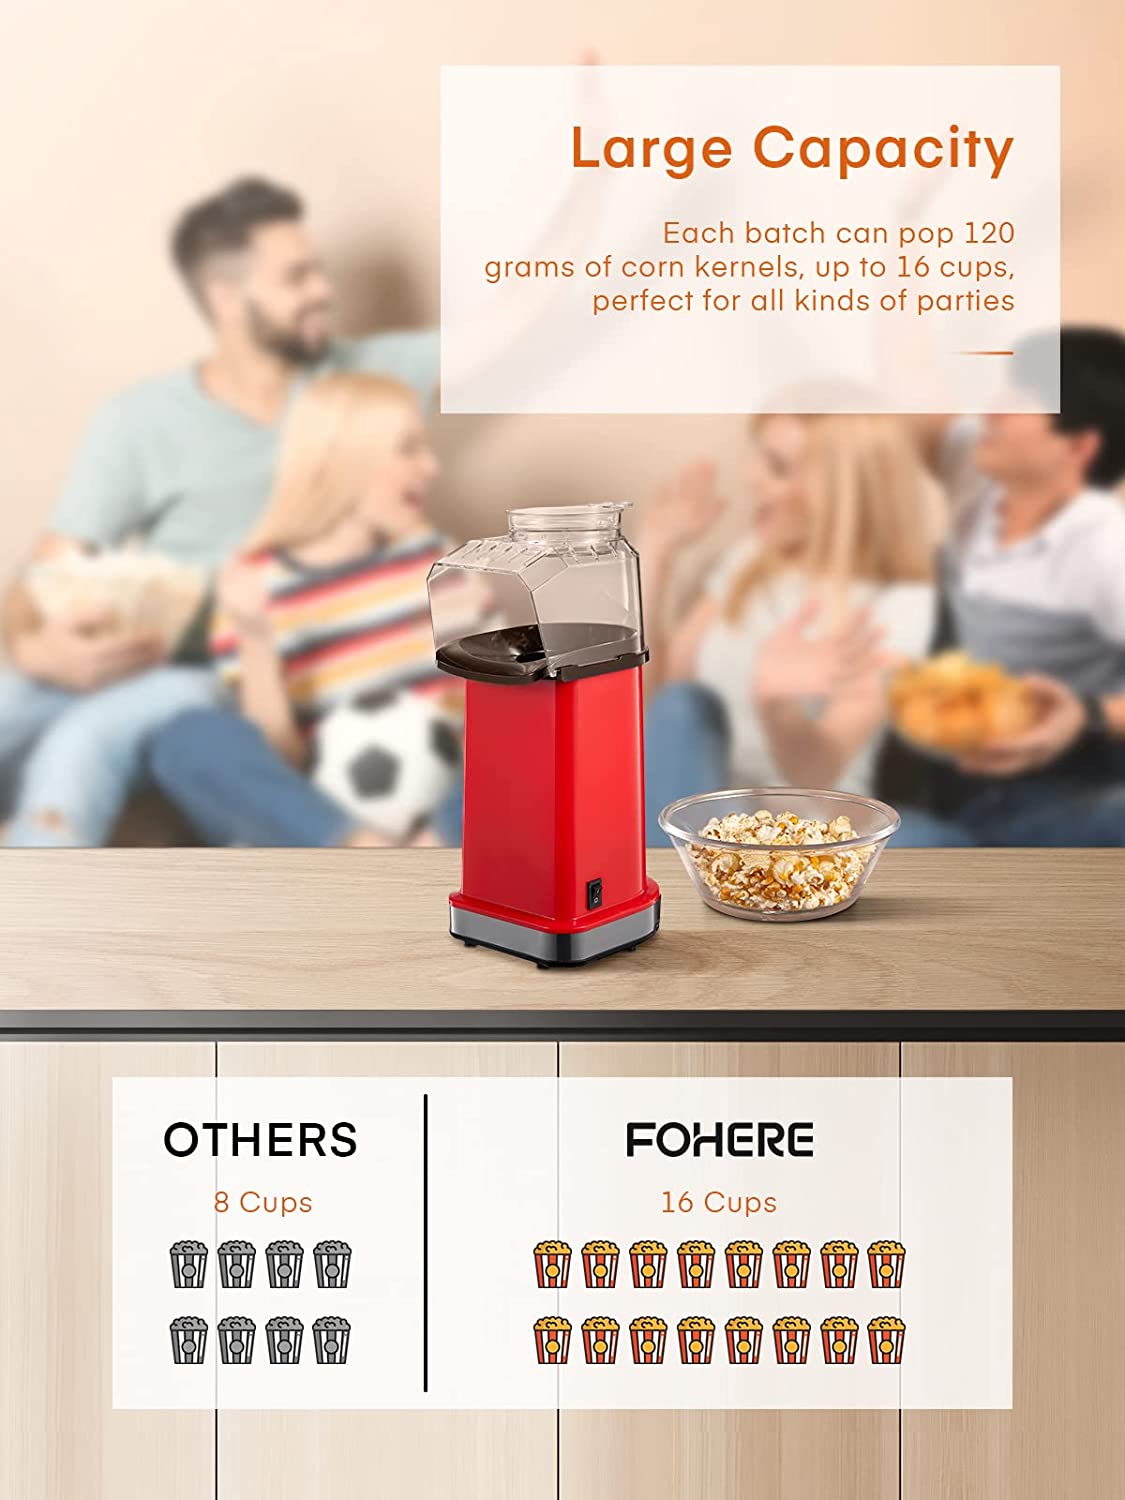 large capacity, FOHERE 1400W Hot Air Popcorn Maker, 18 Cups/4.5 Quart, Popcorn Popper with Measuring Cup, 2min Fast Popping, Electric Pop Corn Maker, Quick Snack, No Oil Needed